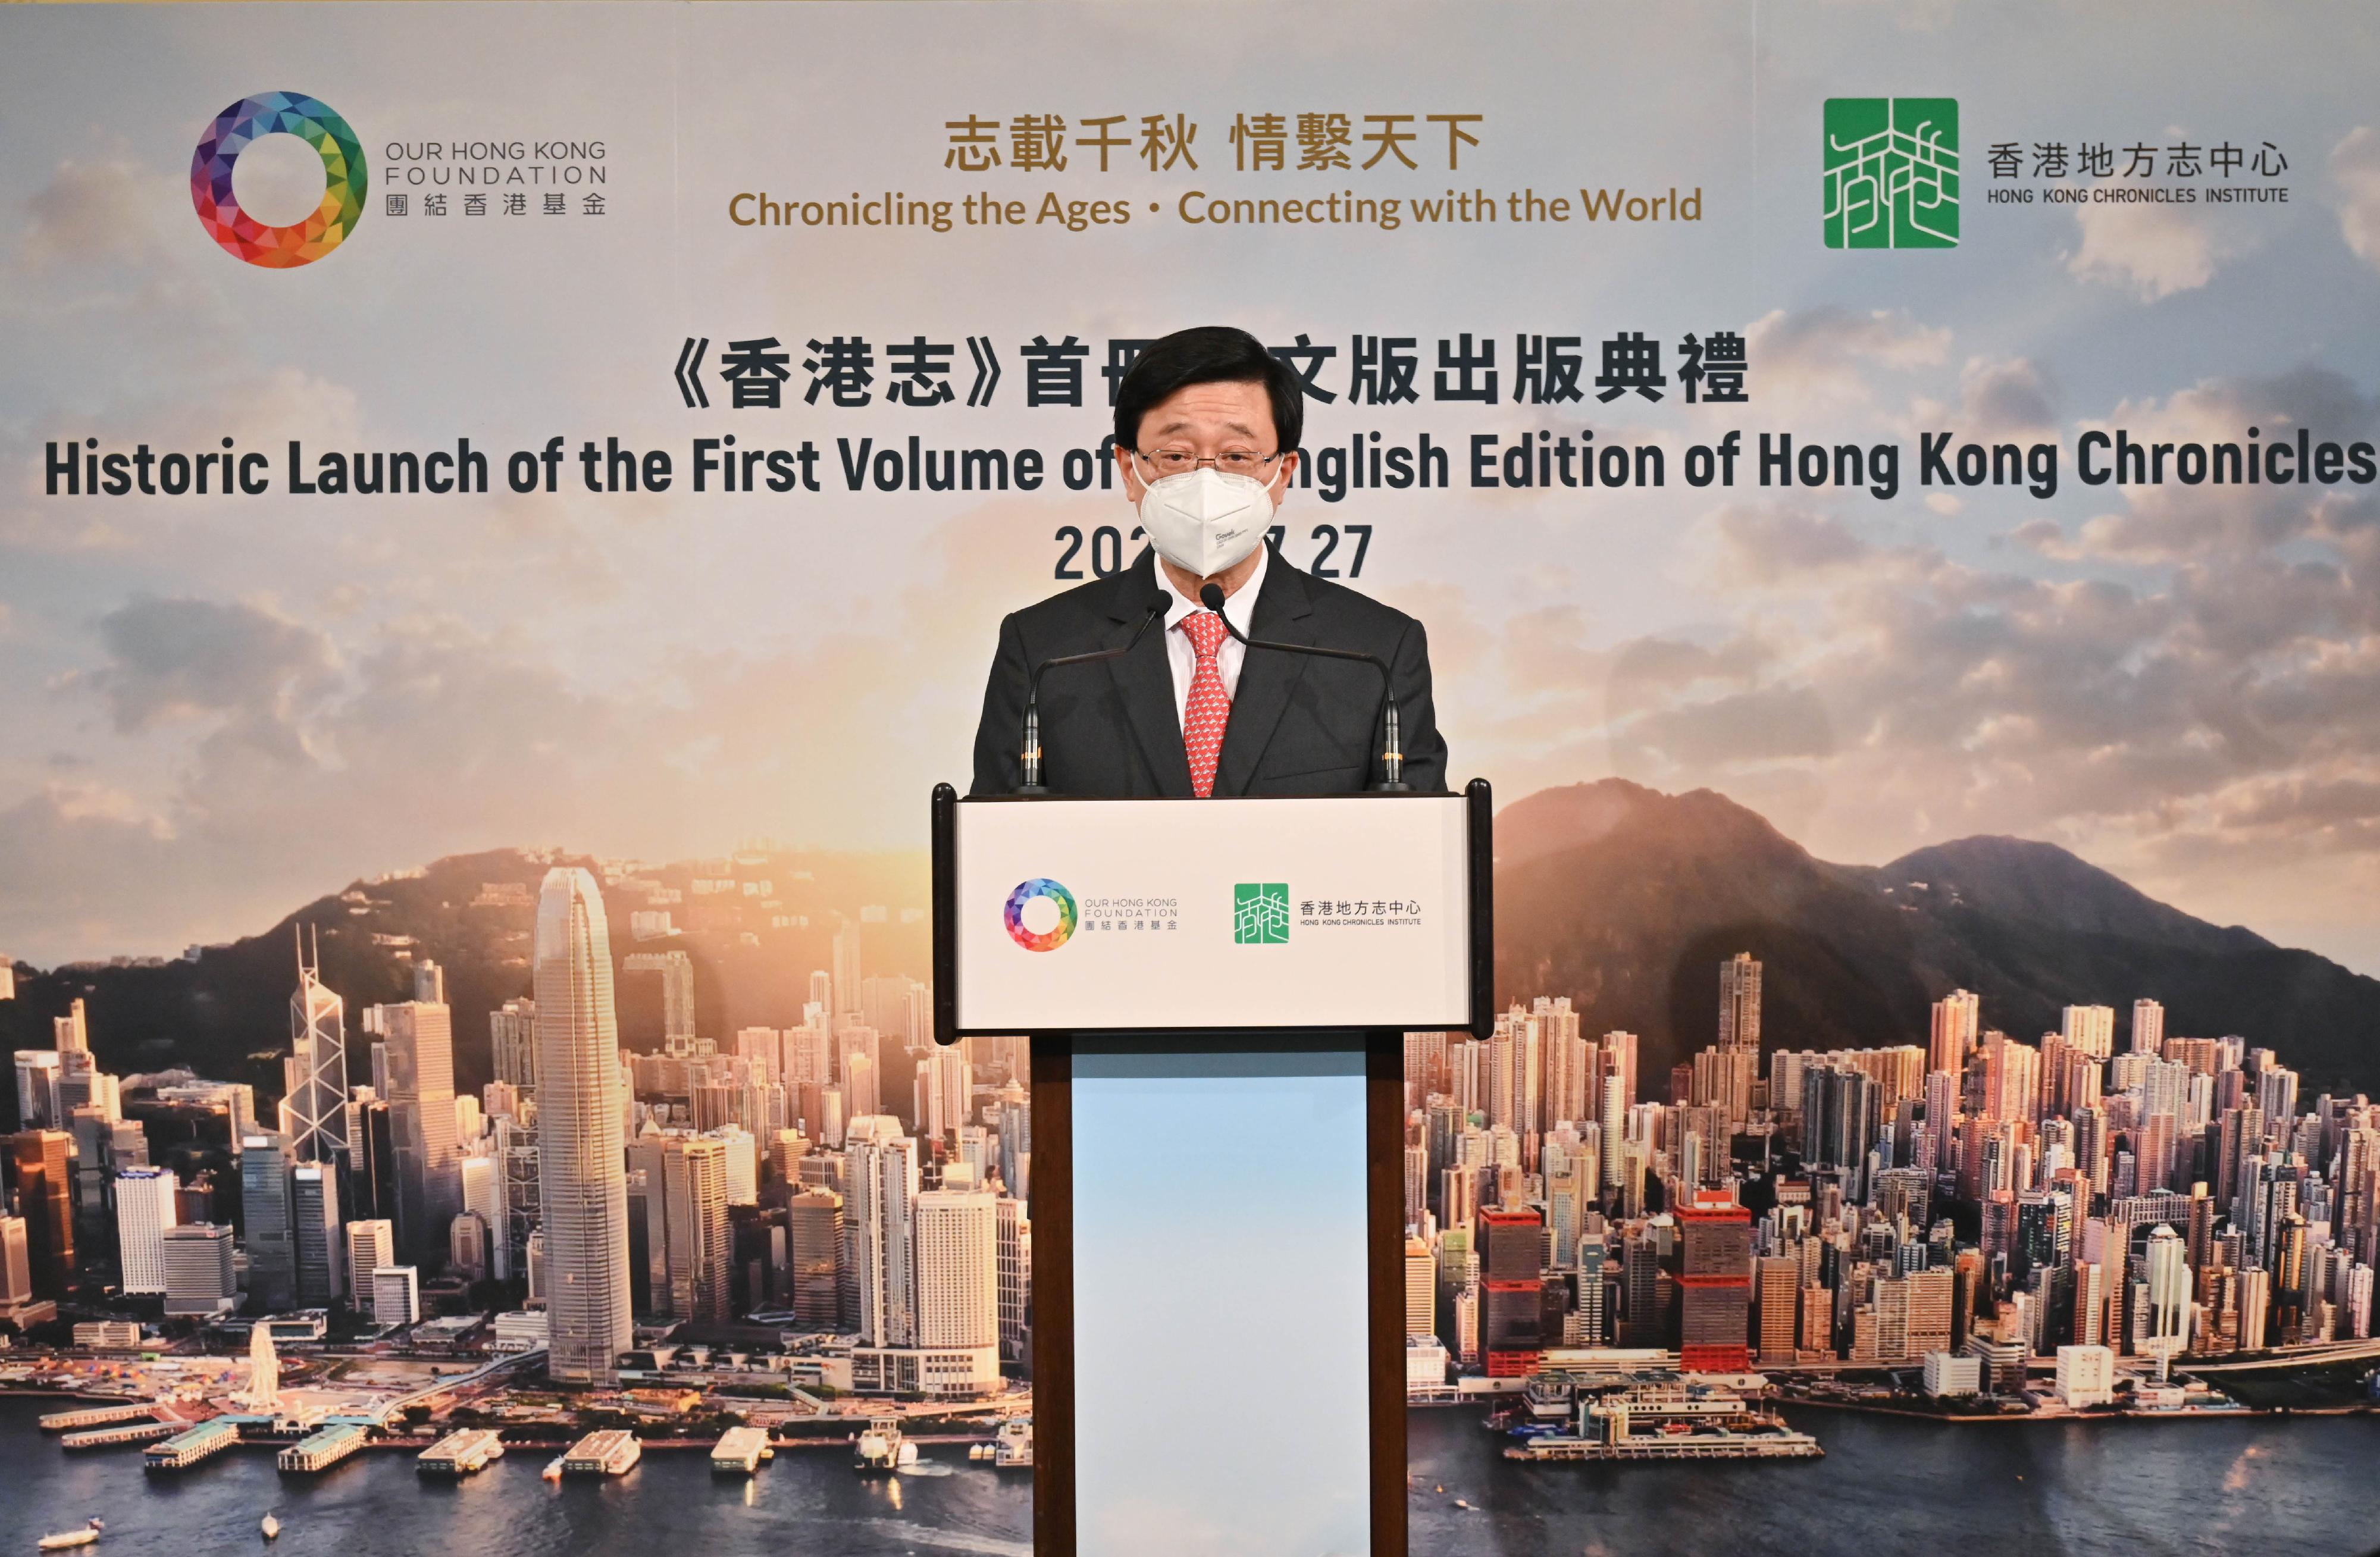 The Chief Executive, Mr John Lee, speaks at the Historic Launch of the First Volume of the English Edition of Hong Kong Chronicles today (July 27).